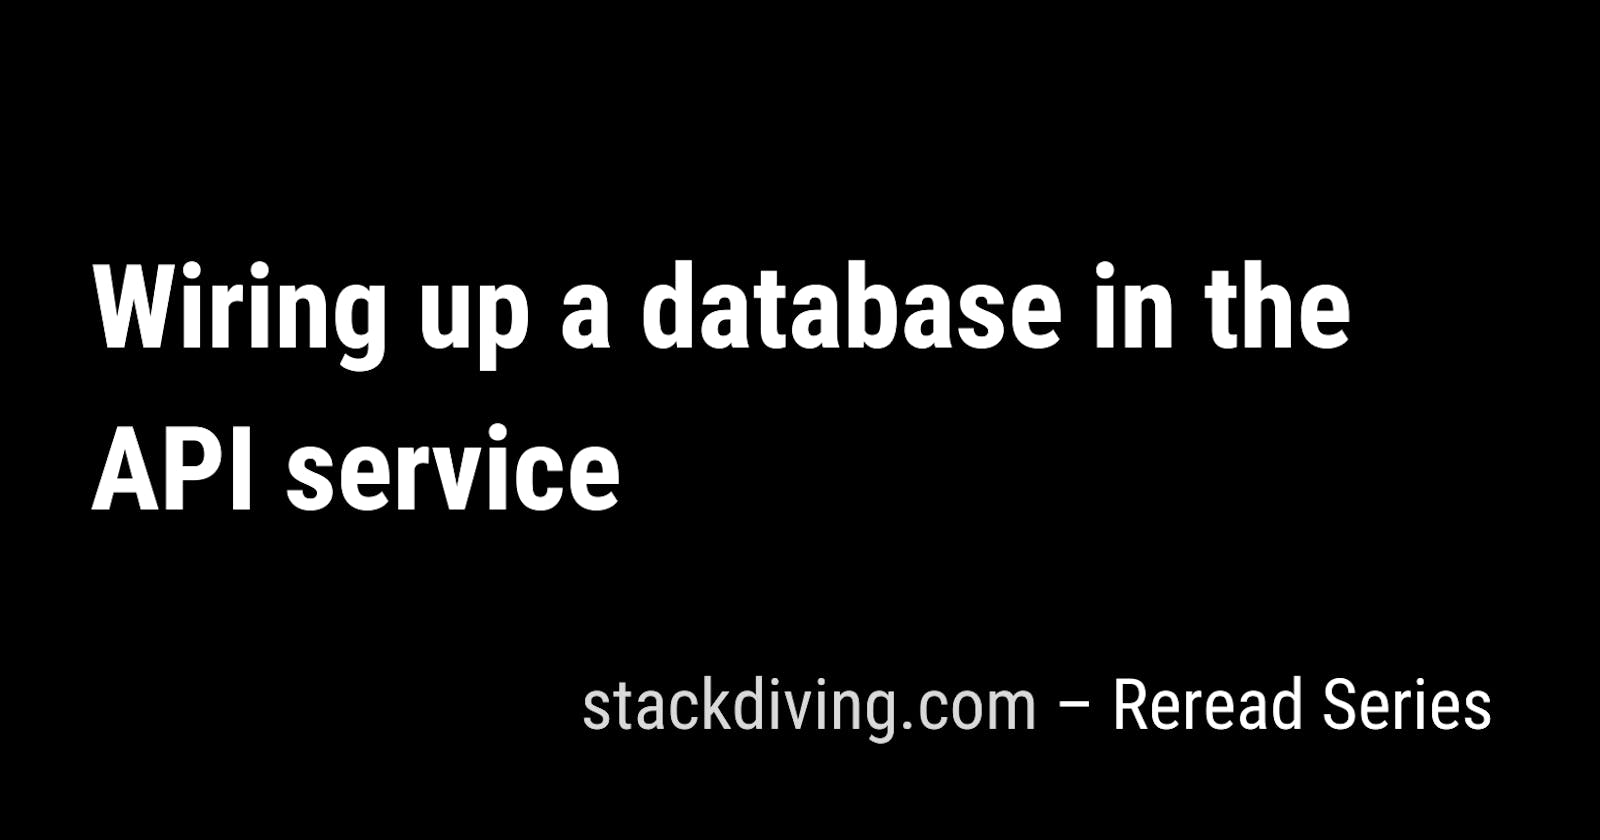 Wiring up a database in the API service